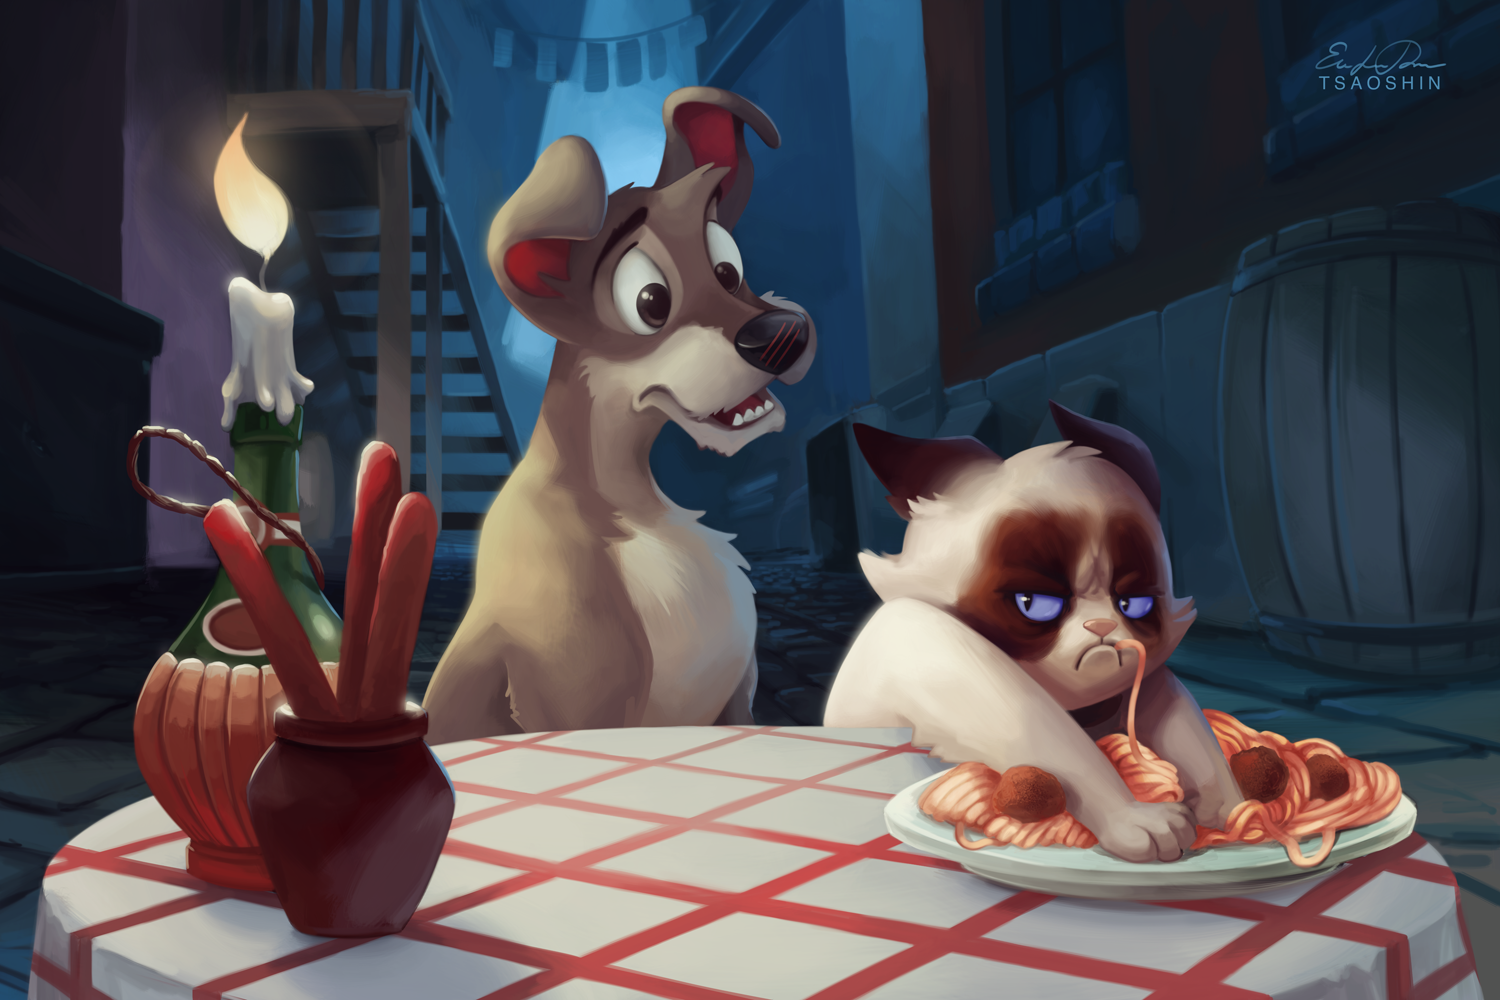 Grumpy Cat as Lady in Lady and the Tramp by Eric Proctor